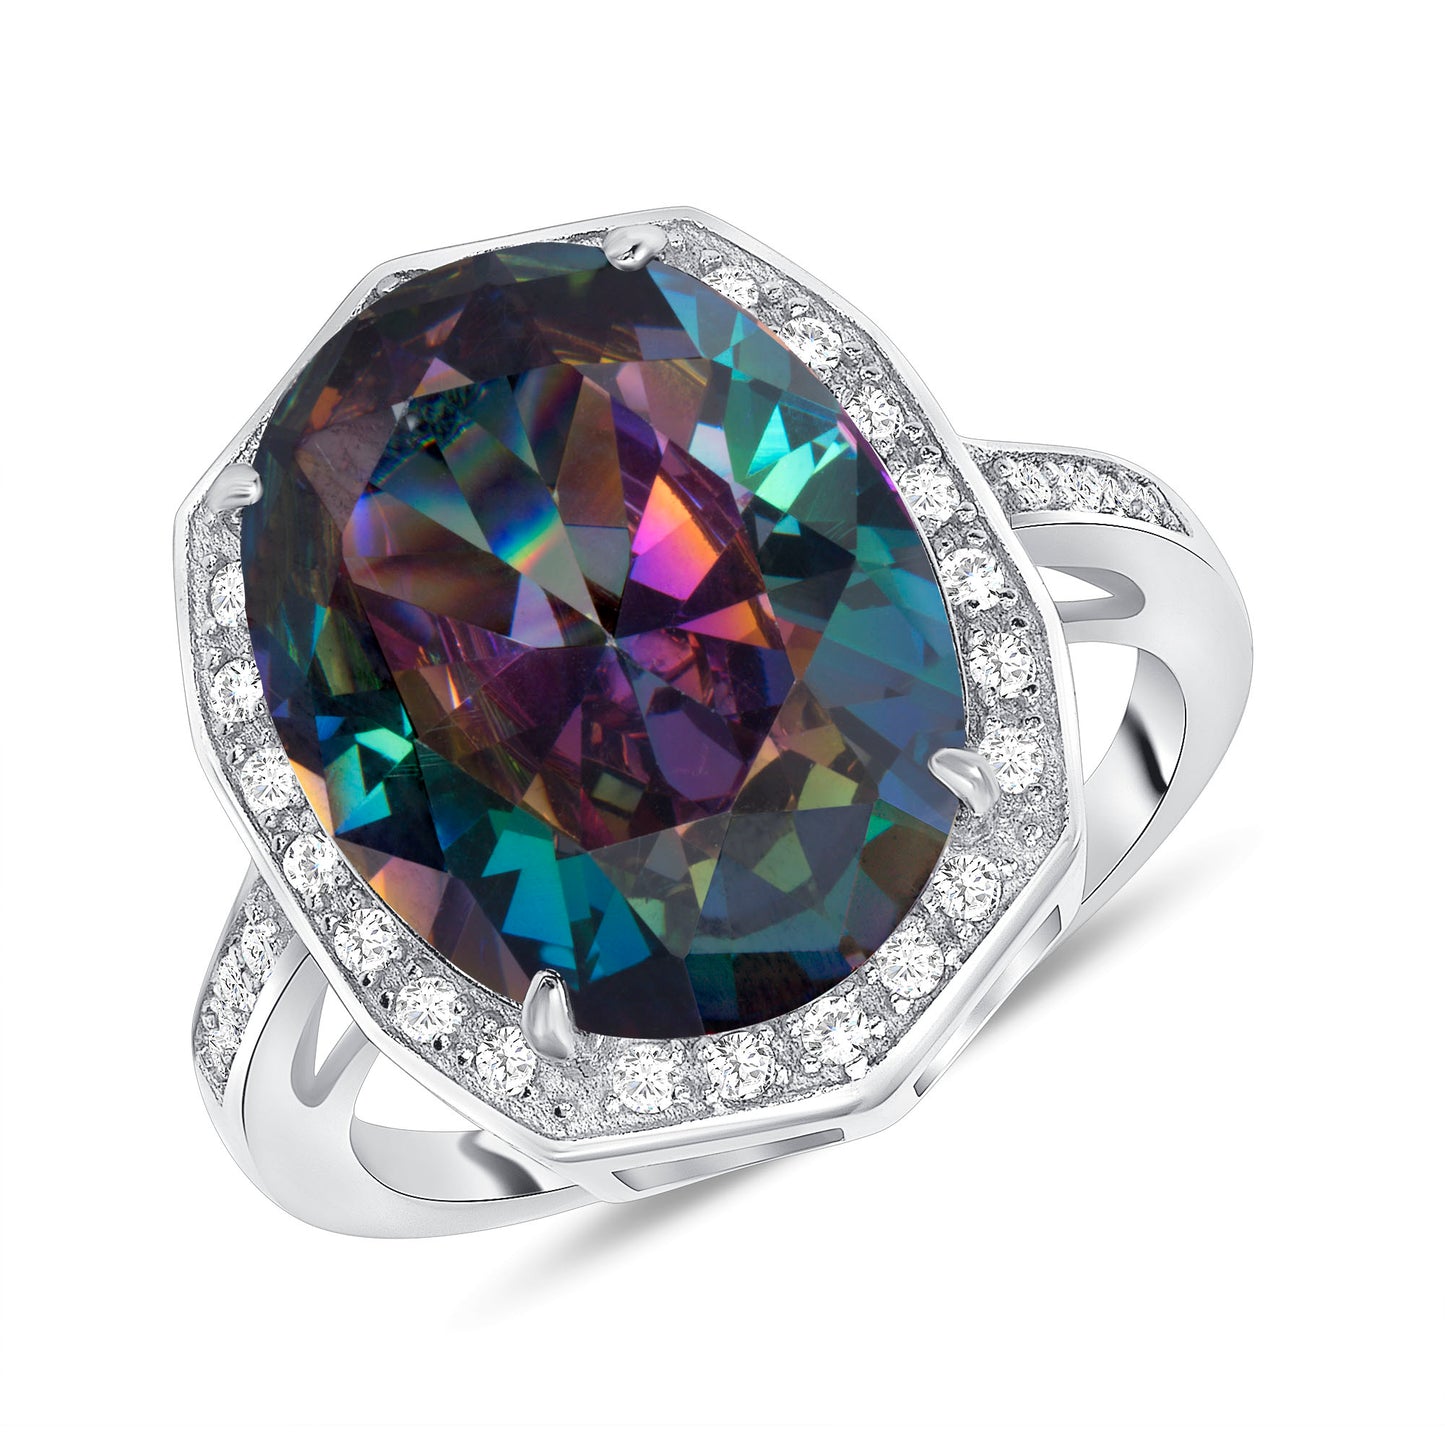 Silver 925 Rhodium Plated Mystic Topaz Cubic Zirconia Halo Style Ring. GR9433MYS